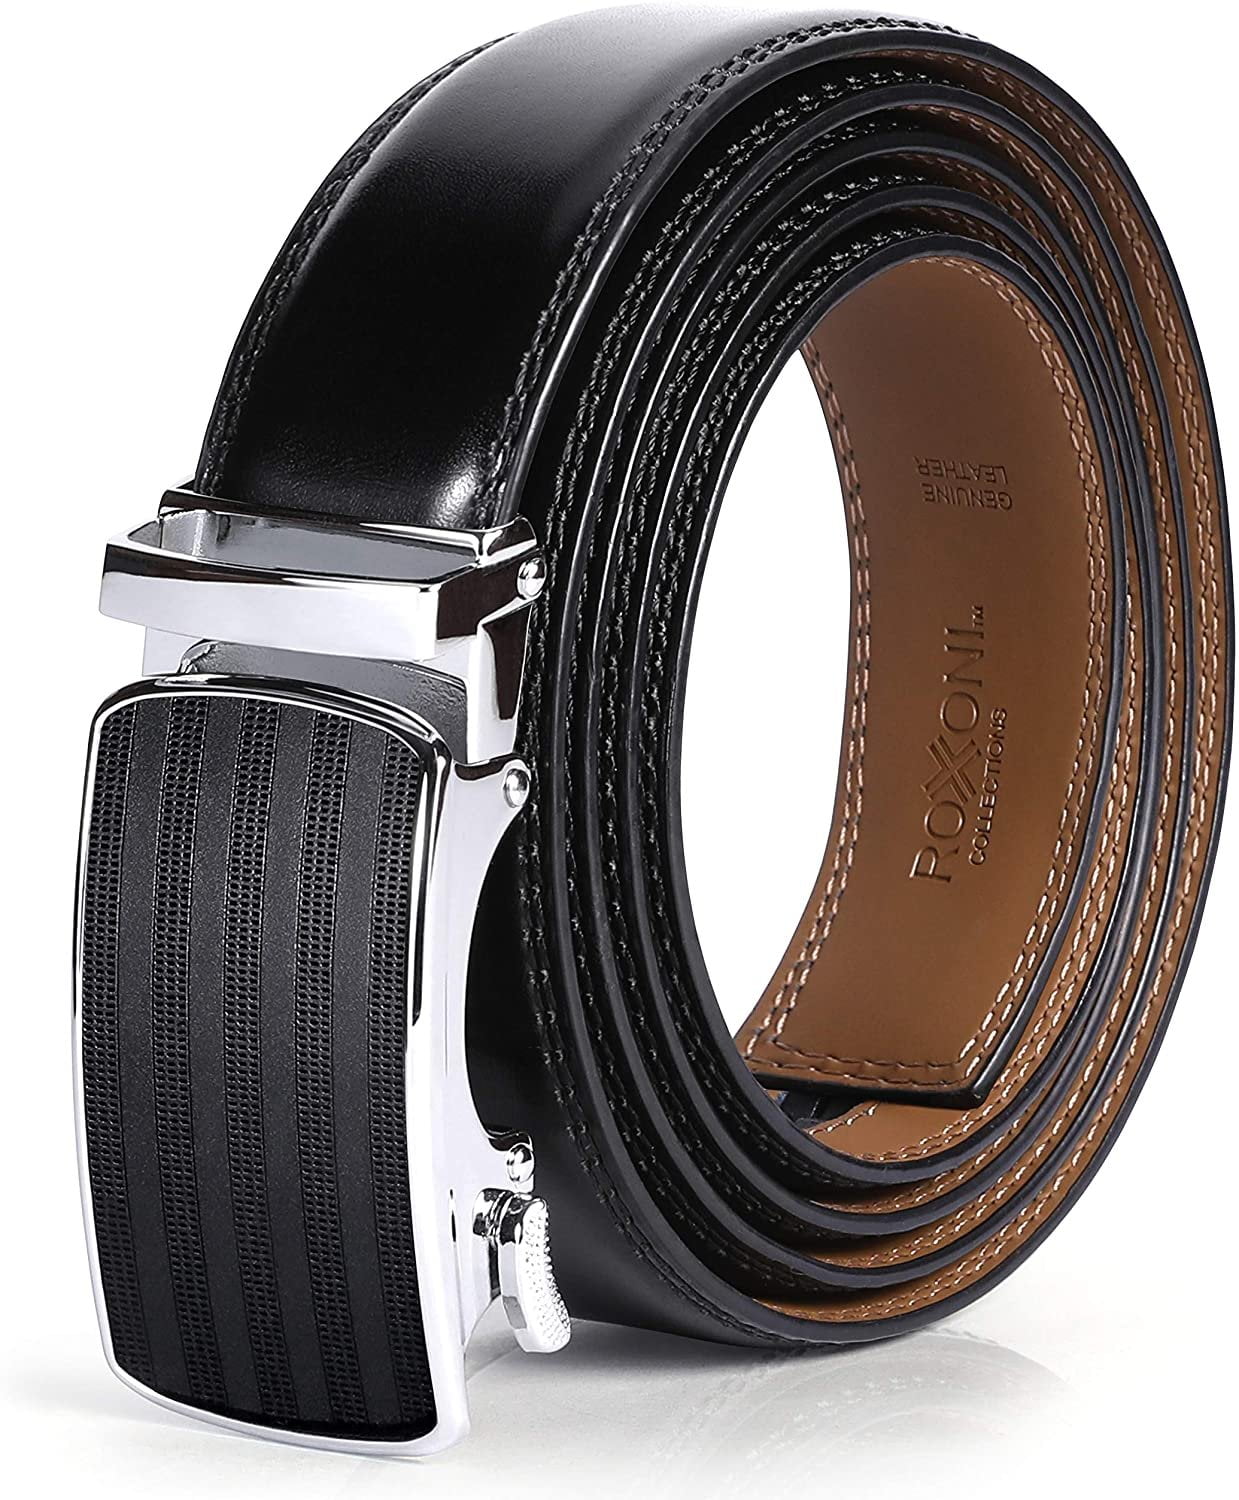 Roxoni Mens Genuine Leather Dress Adjustable Belt with Automatic Buckle ...